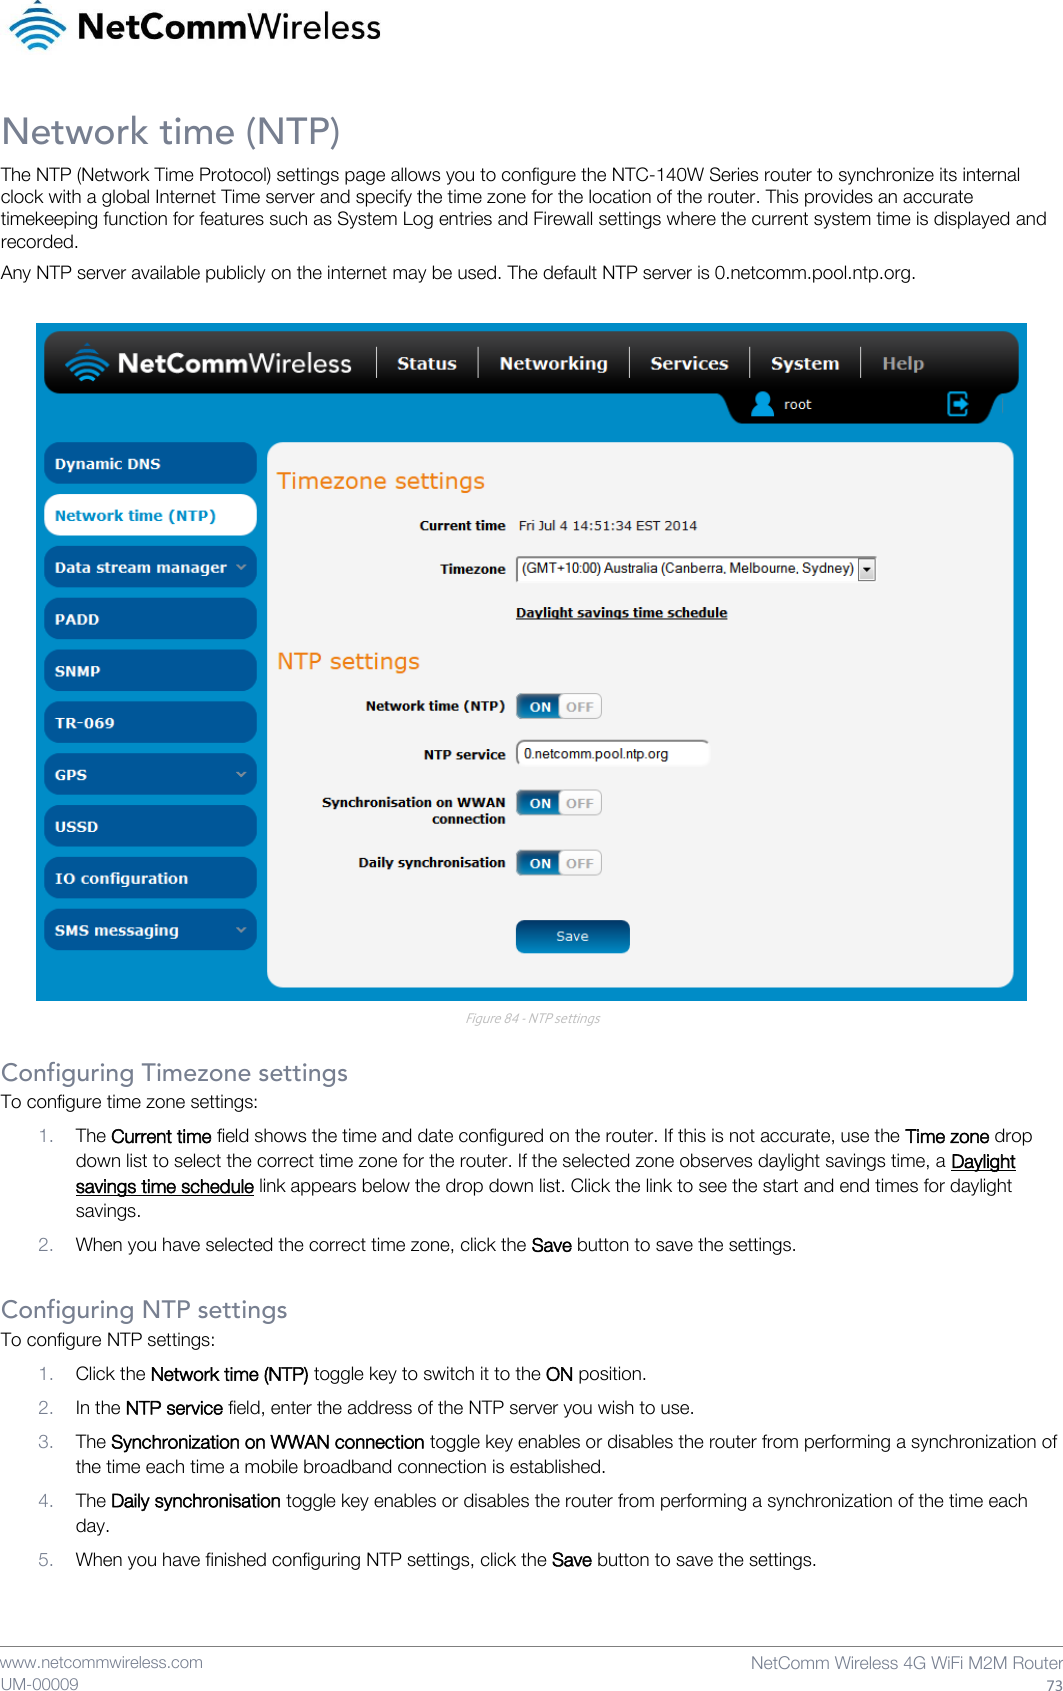    www.netcommwireless.com NetComm Wireless 4G WiFi M2M Router 73 UM-00009 Network time (NTP) The NTP (Network Time Protocol) settings page allows you to configure the NTC-140W Series router to synchronize its internal clock with a global Internet Time server and specify the time zone for the location of the router. This provides an accurate timekeeping function for features such as System Log entries and Firewall settings where the current system time is displayed and recorded. Any NTP server available publicly on the internet may be used. The default NTP server is 0.netcomm.pool.ntp.org.   Figure 84 - NTP settings  Configuring Timezone settings To configure time zone settings: 1. The Current time field shows the time and date configured on the router. If this is not accurate, use the Time zone drop down list to select the correct time zone for the router. If the selected zone observes daylight savings time, a Daylight savings time schedule link appears below the drop down list. Click the link to see the start and end times for daylight savings. 2. When you have selected the correct time zone, click the Save button to save the settings.  Configuring NTP settings To configure NTP settings: 1. Click the Network time (NTP) toggle key to switch it to the ON position. 2. In the NTP service field, enter the address of the NTP server you wish to use. 3. The Synchronization on WWAN connection toggle key enables or disables the router from performing a synchronization of the time each time a mobile broadband connection is established.  4. The Daily synchronisation toggle key enables or disables the router from performing a synchronization of the time each day. 5. When you have finished configuring NTP settings, click the Save button to save the settings.   